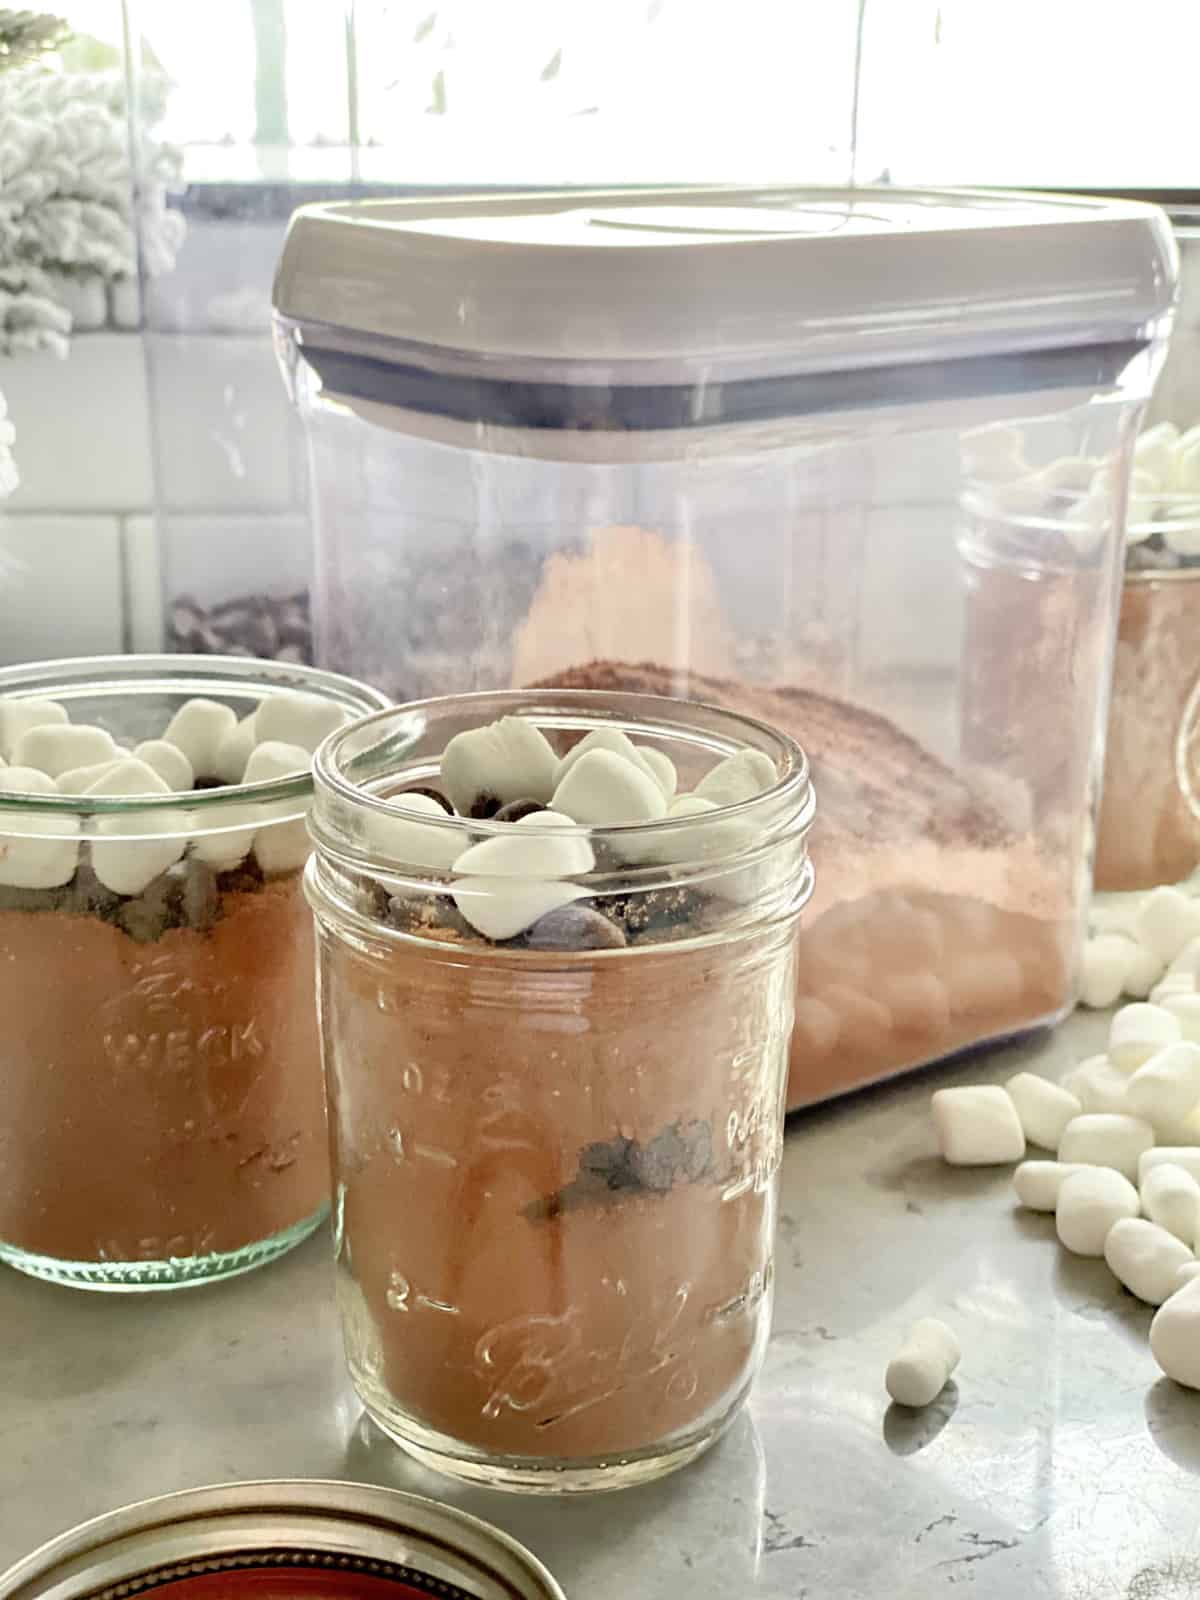 Two jars fileld with hot cocoa mix with container in the background.